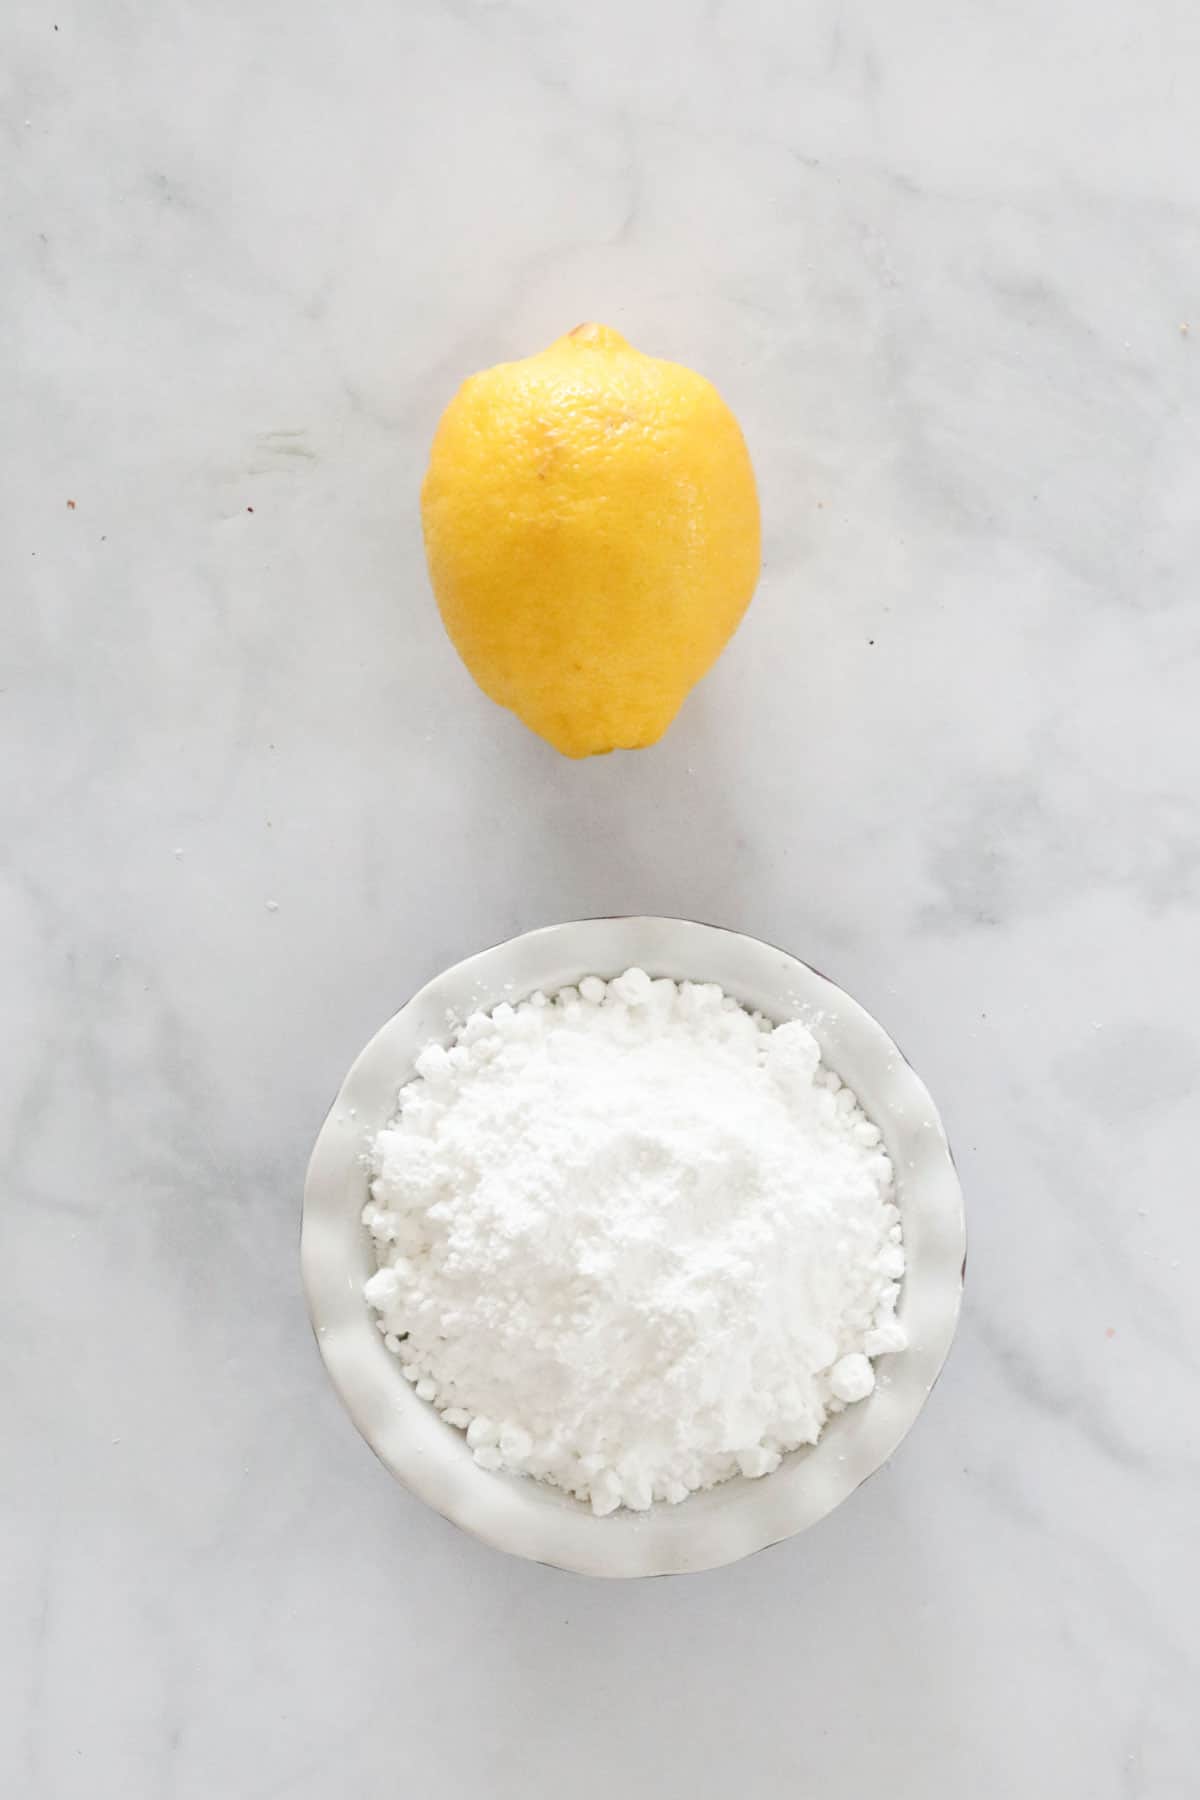 A fresh lemon and icing sugar needed to make the lemon icing to top the blondies with.